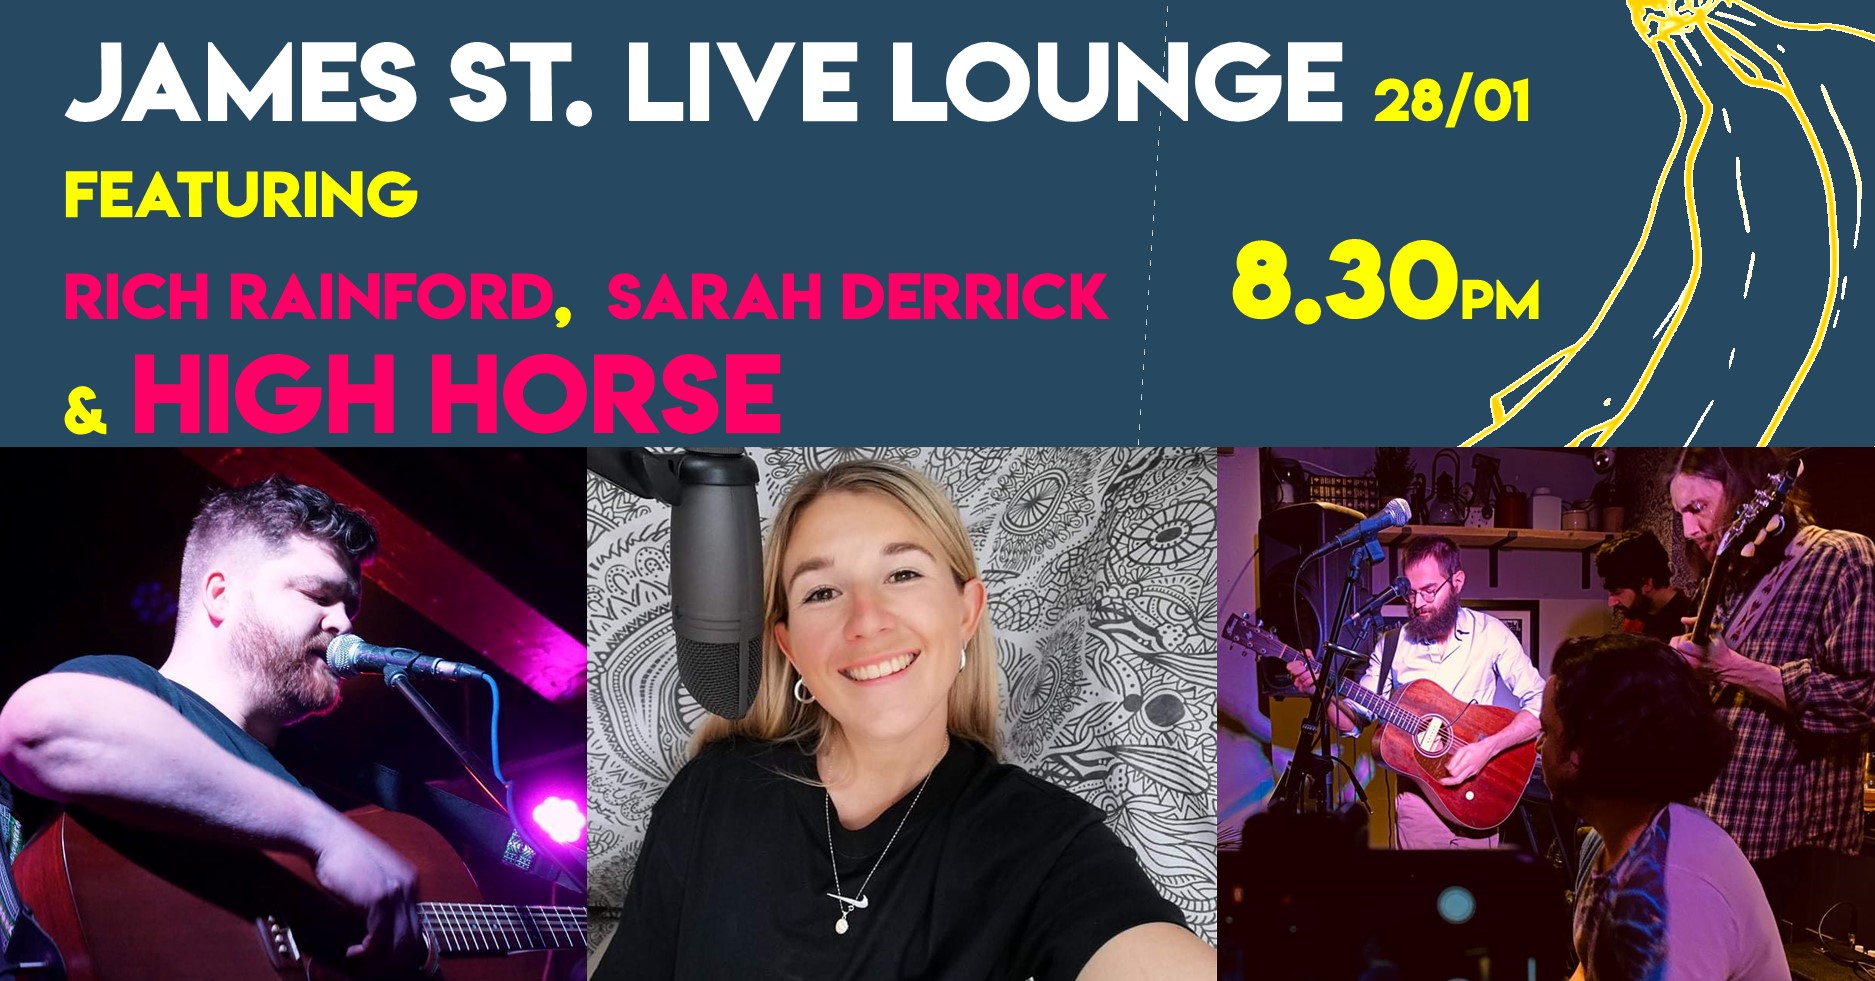 Live Lounge banner with Rich Rainford, Sarah Derrick, and High Horse